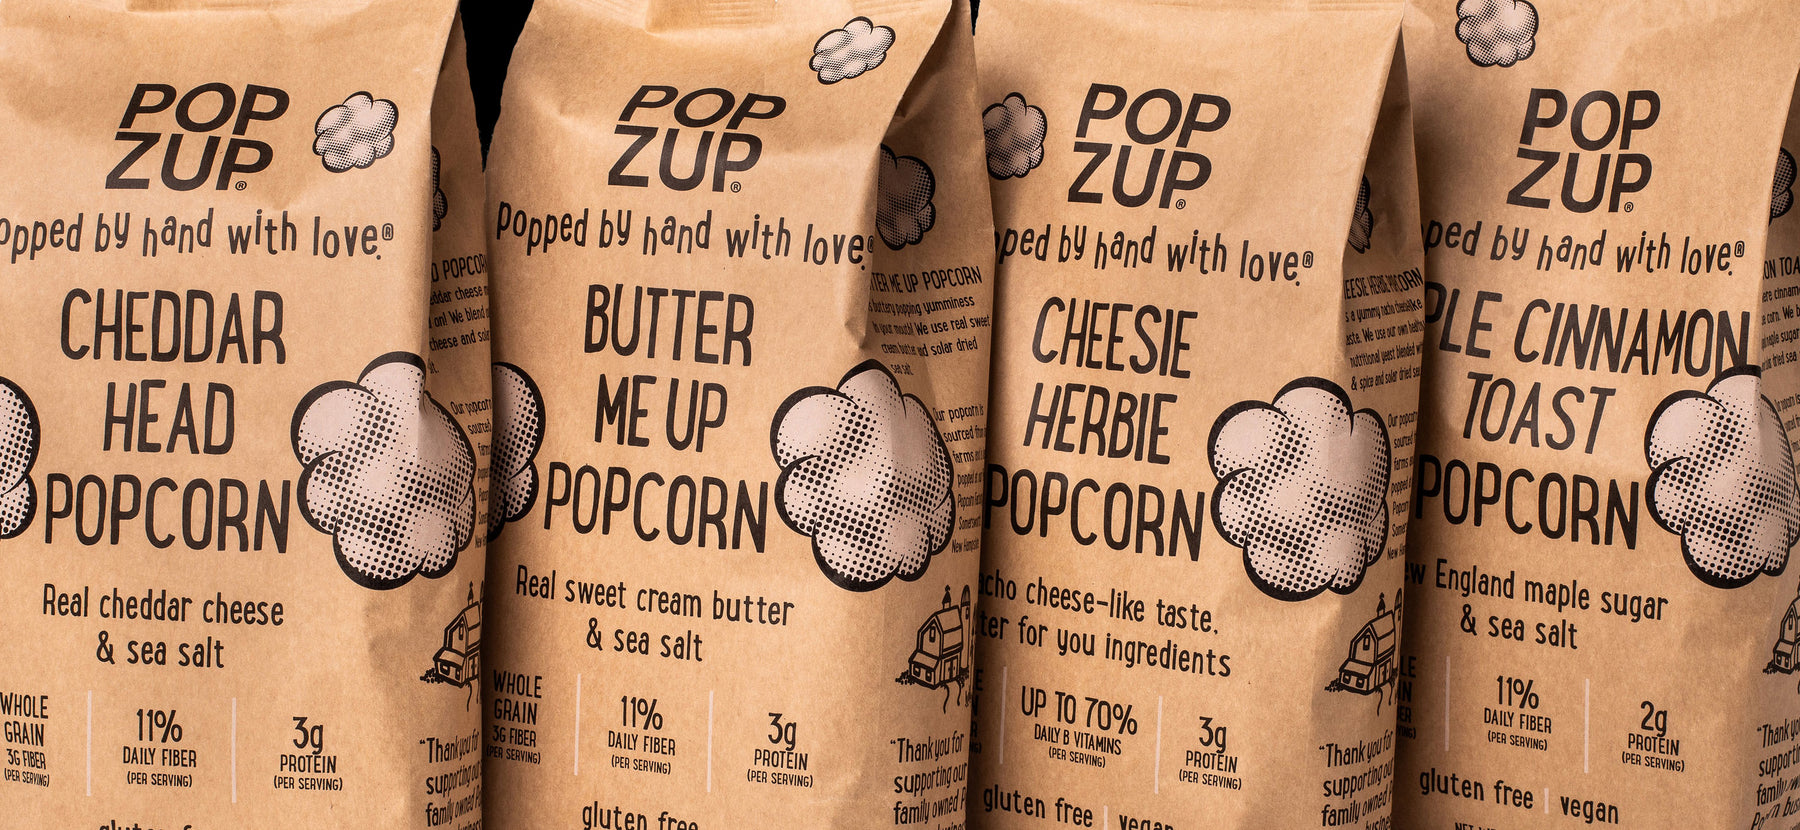 Popzup Popcorn 5 oz ready to eat bags